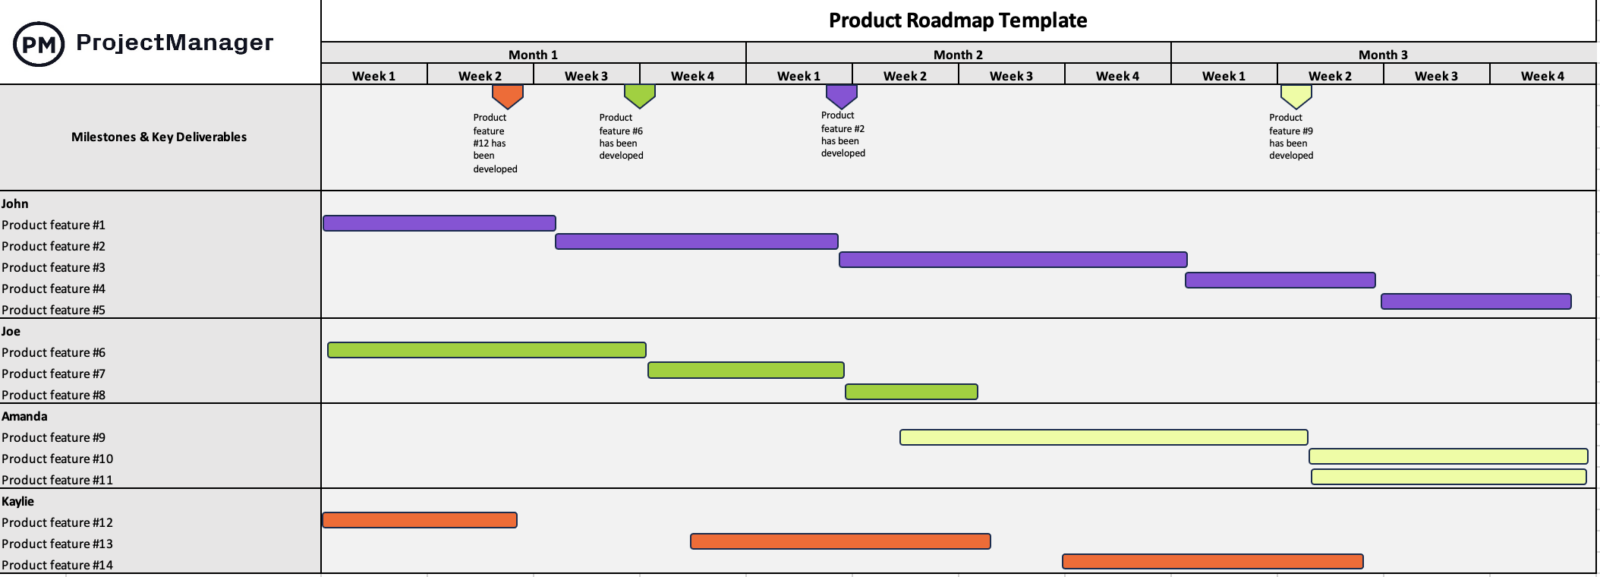 product roadmap template for Excel